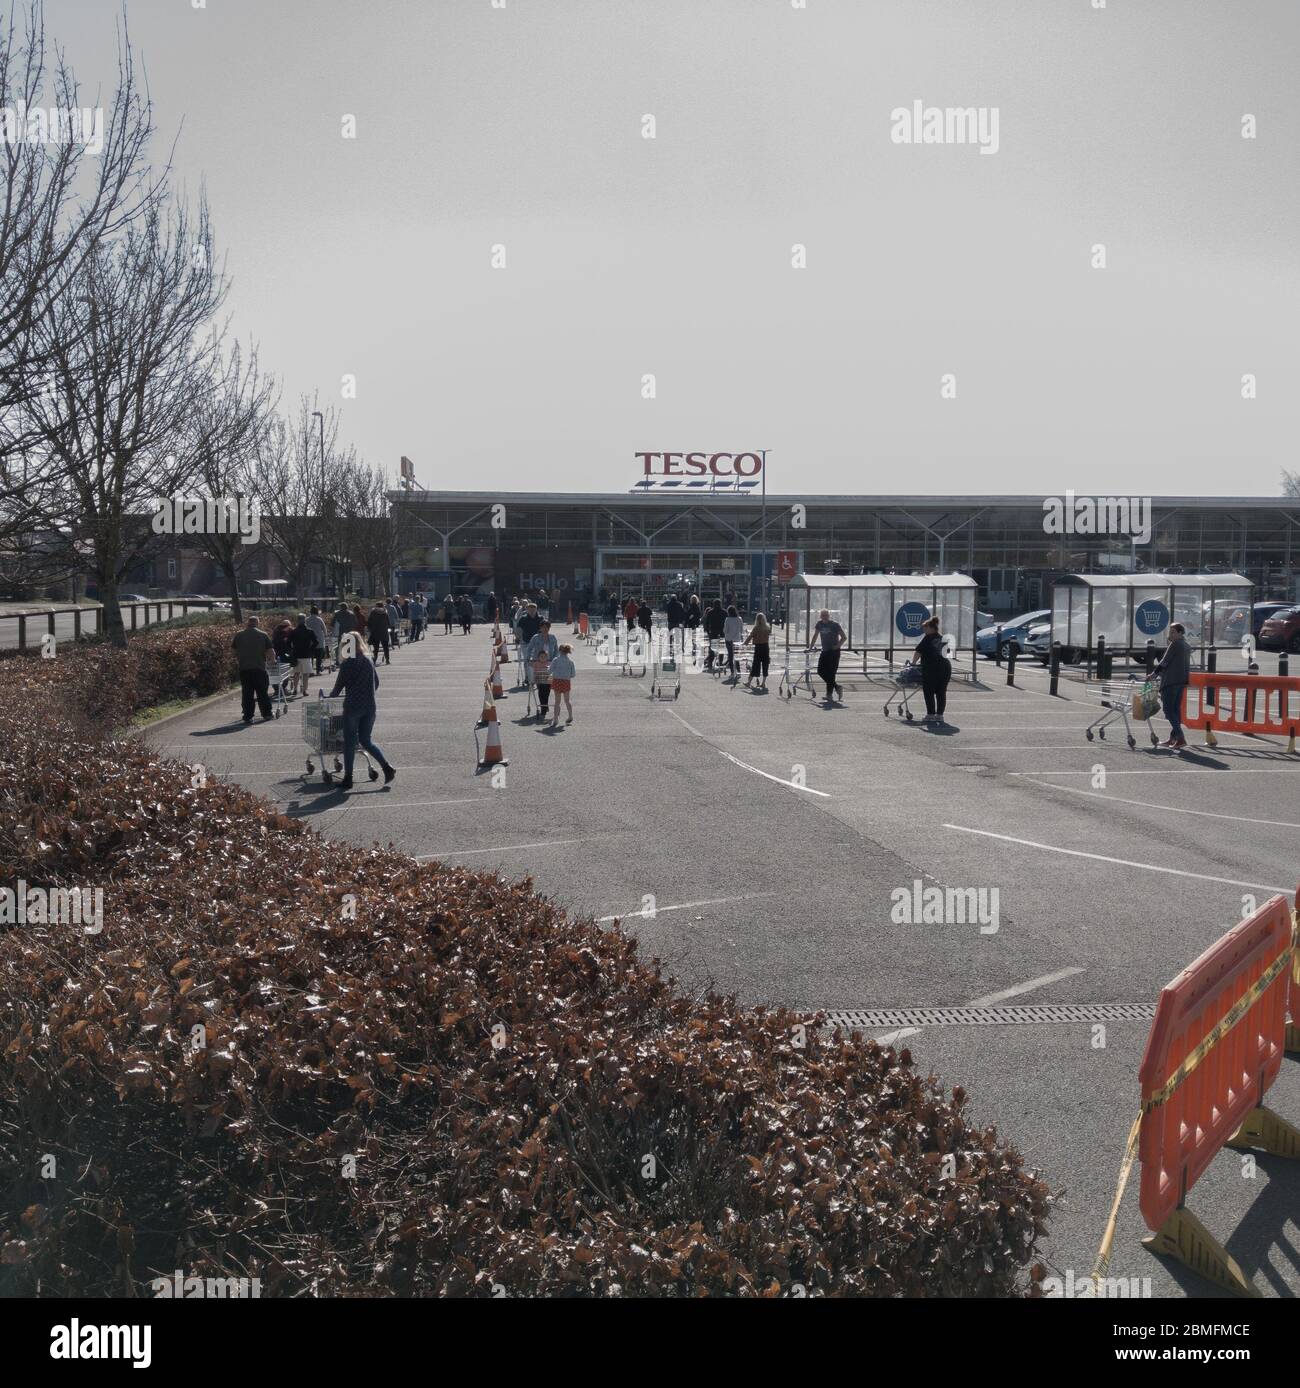 Tesco, Clowne, Chesterfield / U.K - March 26 2020 People queuing up to do the weeks shopping in the U.K. This is midweek at the near the start of the Stock Photo